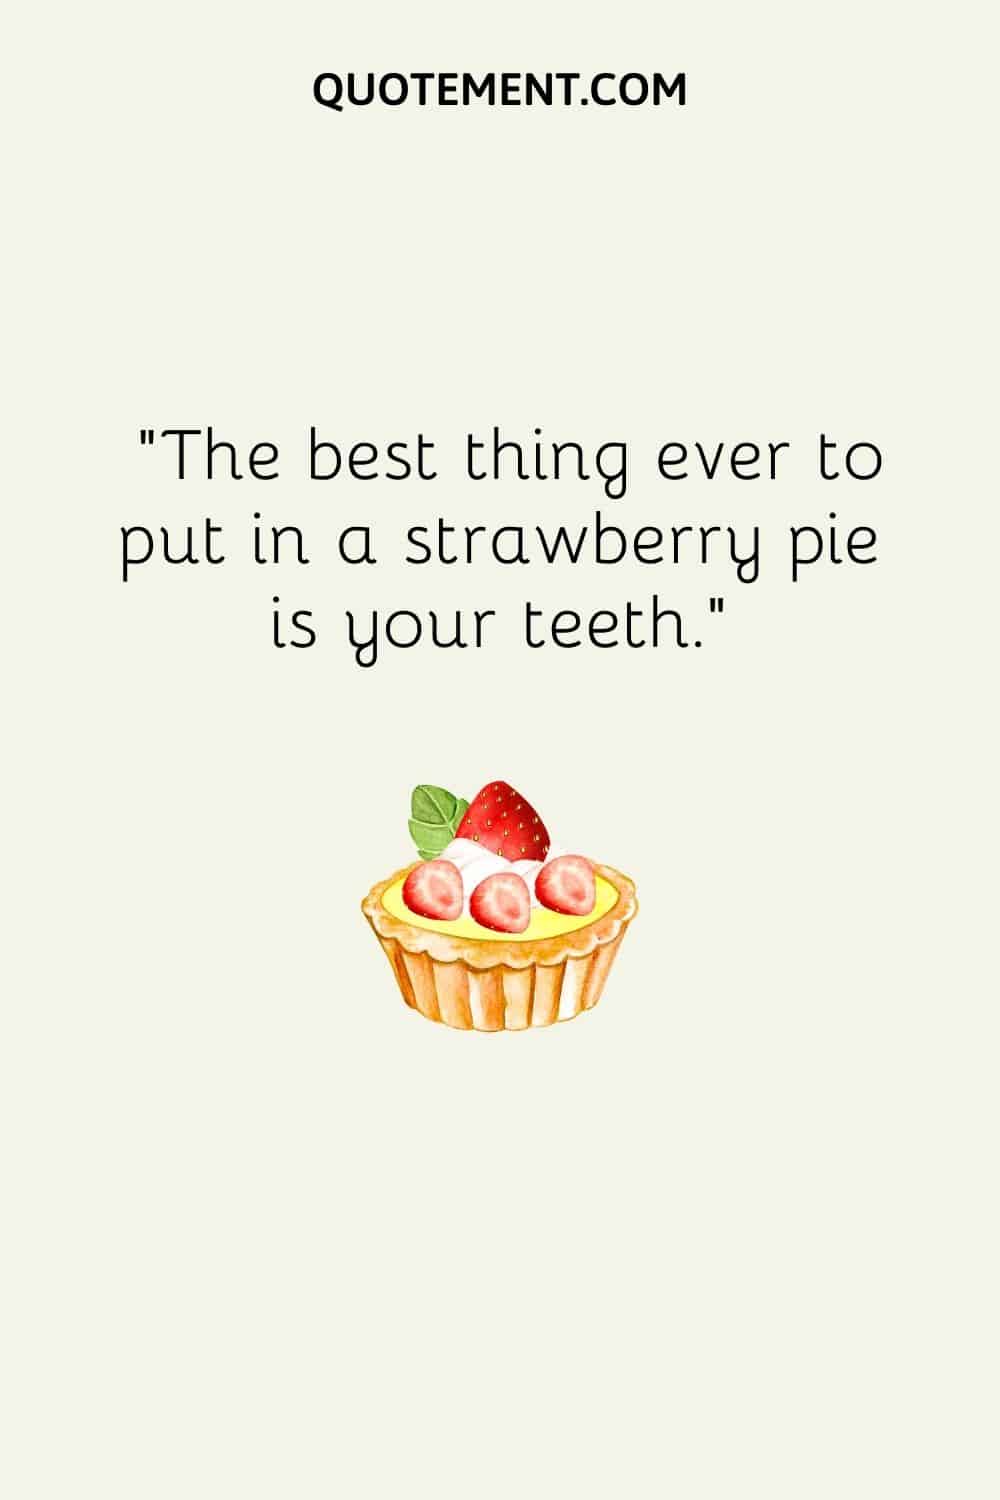 The best thing ever to put in a strawberry pie is your teeth